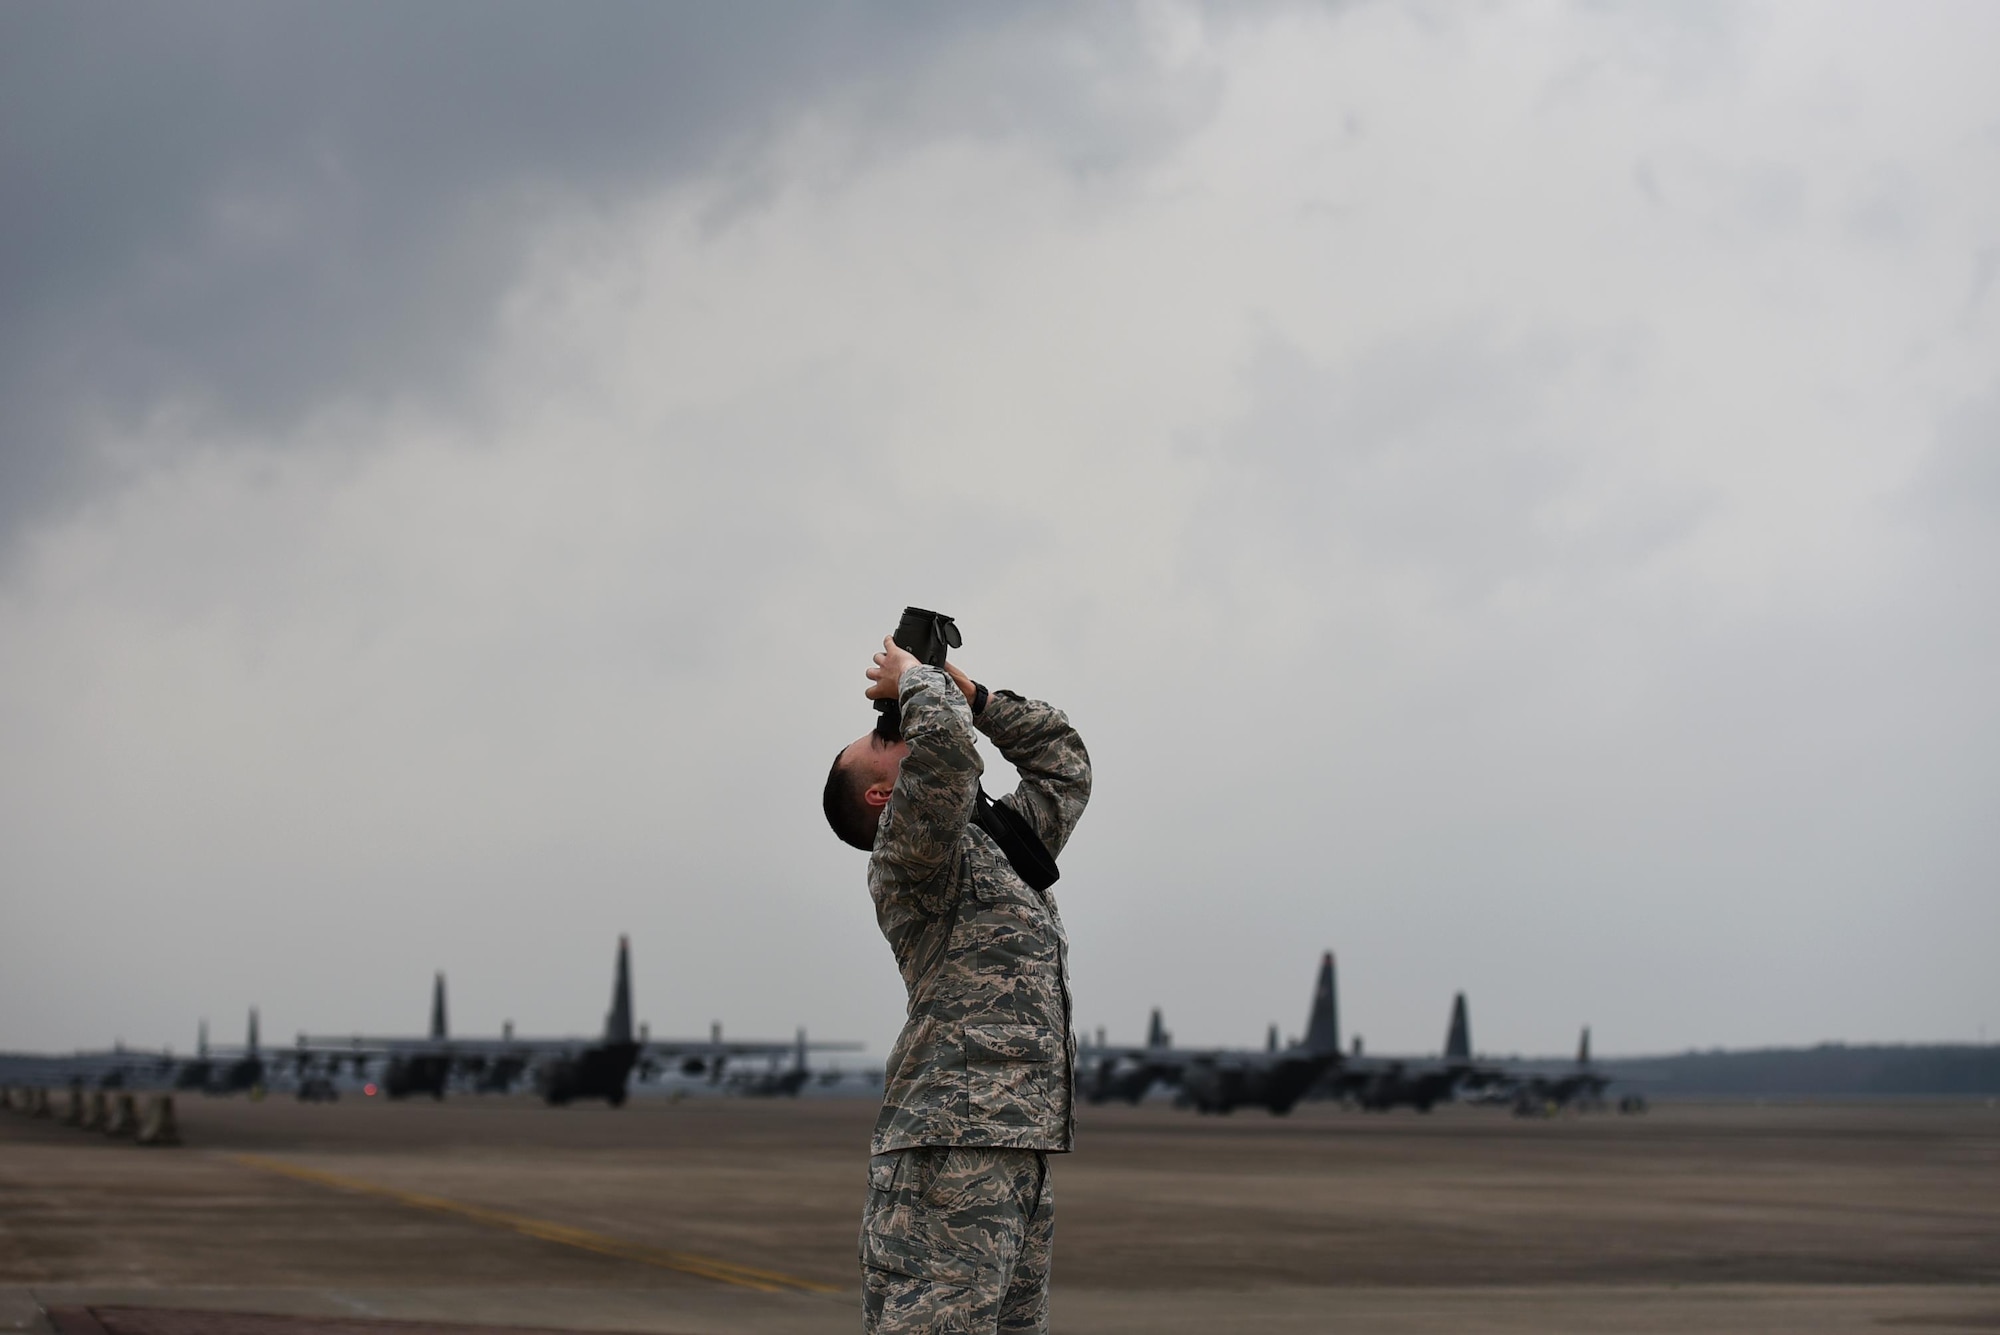 U.S. Air Force Airman 1st Class Jacob Phipps, 19th Operations Support Squadron Weather Flight journeyman, uses a laser range finder during a tornado watch Feb. 28, 2017, at Little Rock Air Force Base, Ark. As meteorologists, Airmen monitor weather patterns 24/7 to alert aircrews and base populace of severe weather conditions imminent in the local area. (U.S. Air Force photo by Airman 1st Class Kevin Sommer Giron)